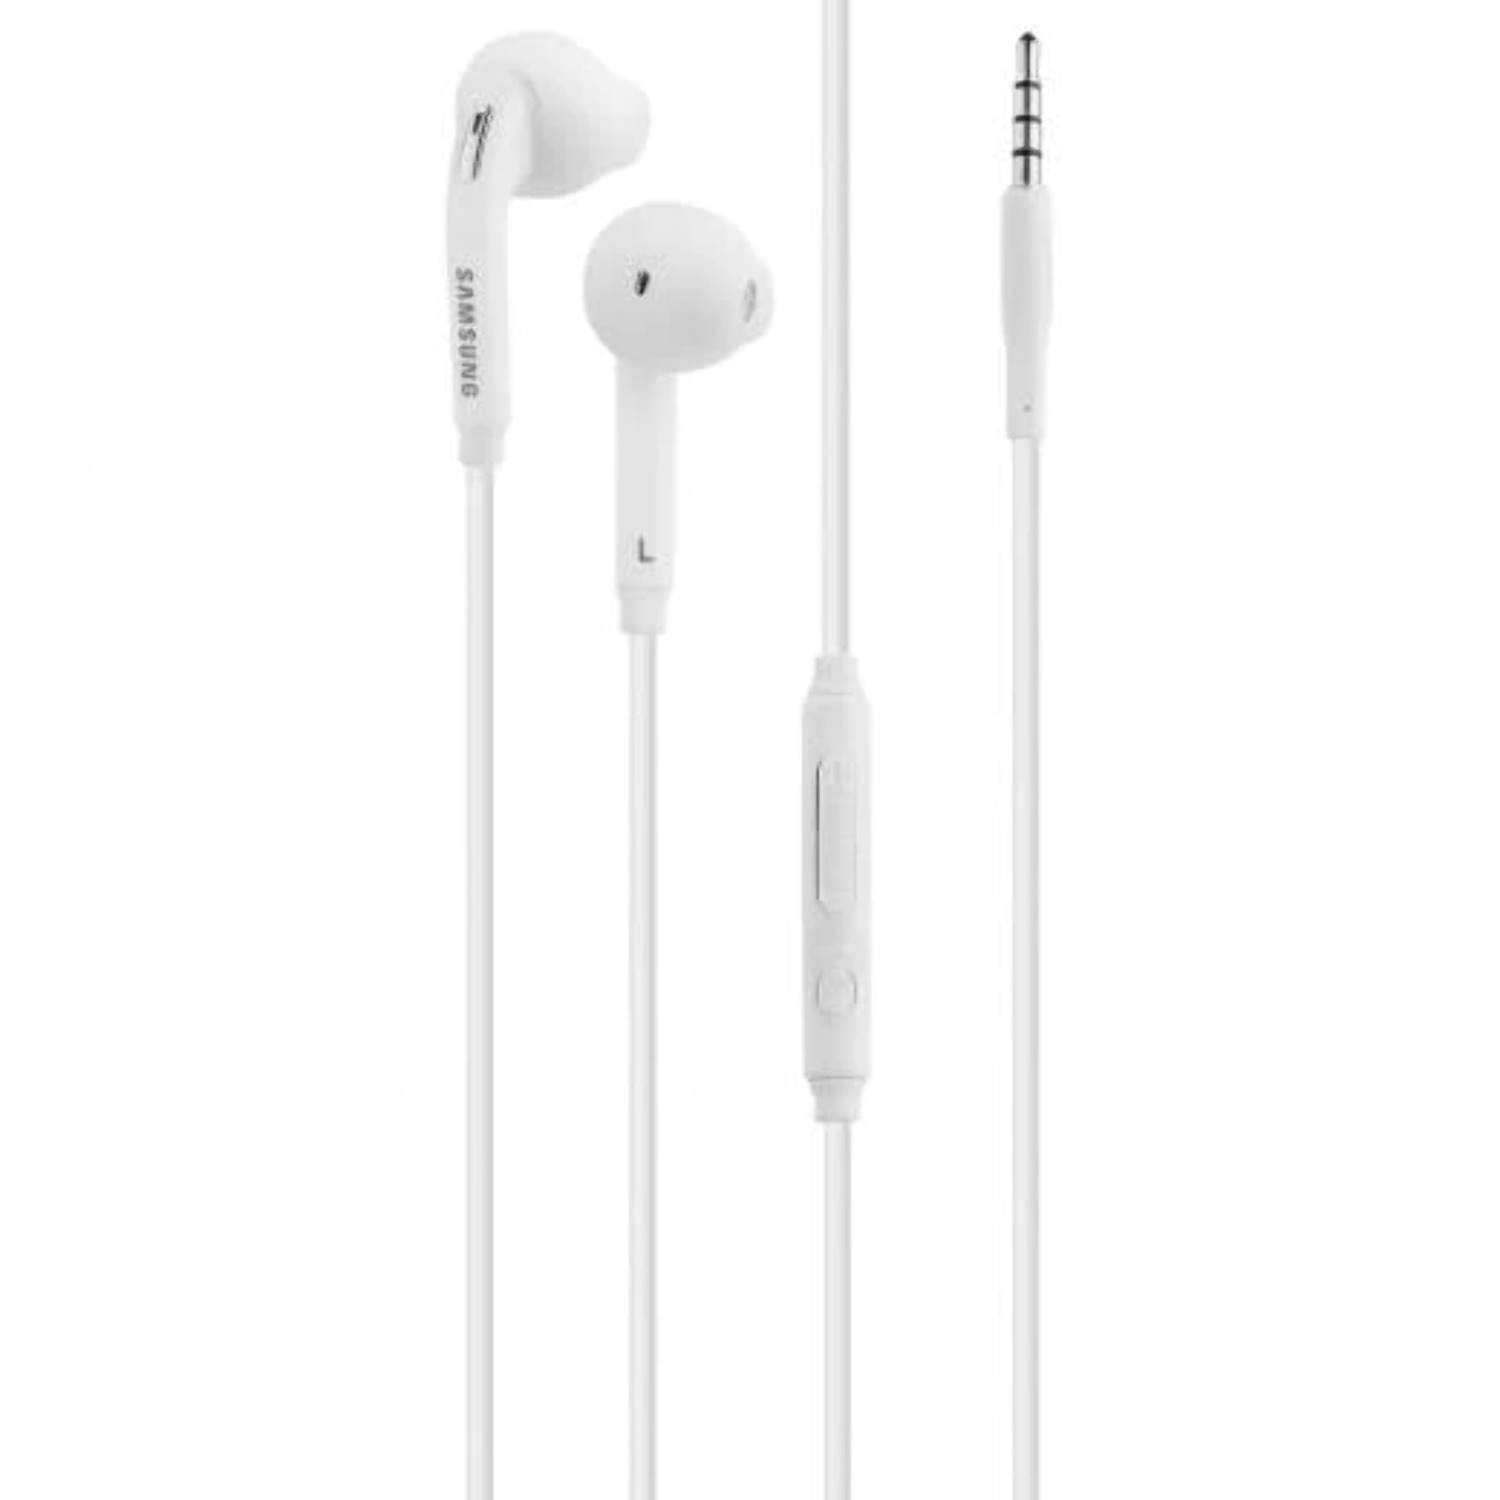 Premium Wired Headset 3.5mm Earbud Stereo In-Ear Headphones with in-line Remote & Microphone Compatible with HTC U Play - image 1 of 1